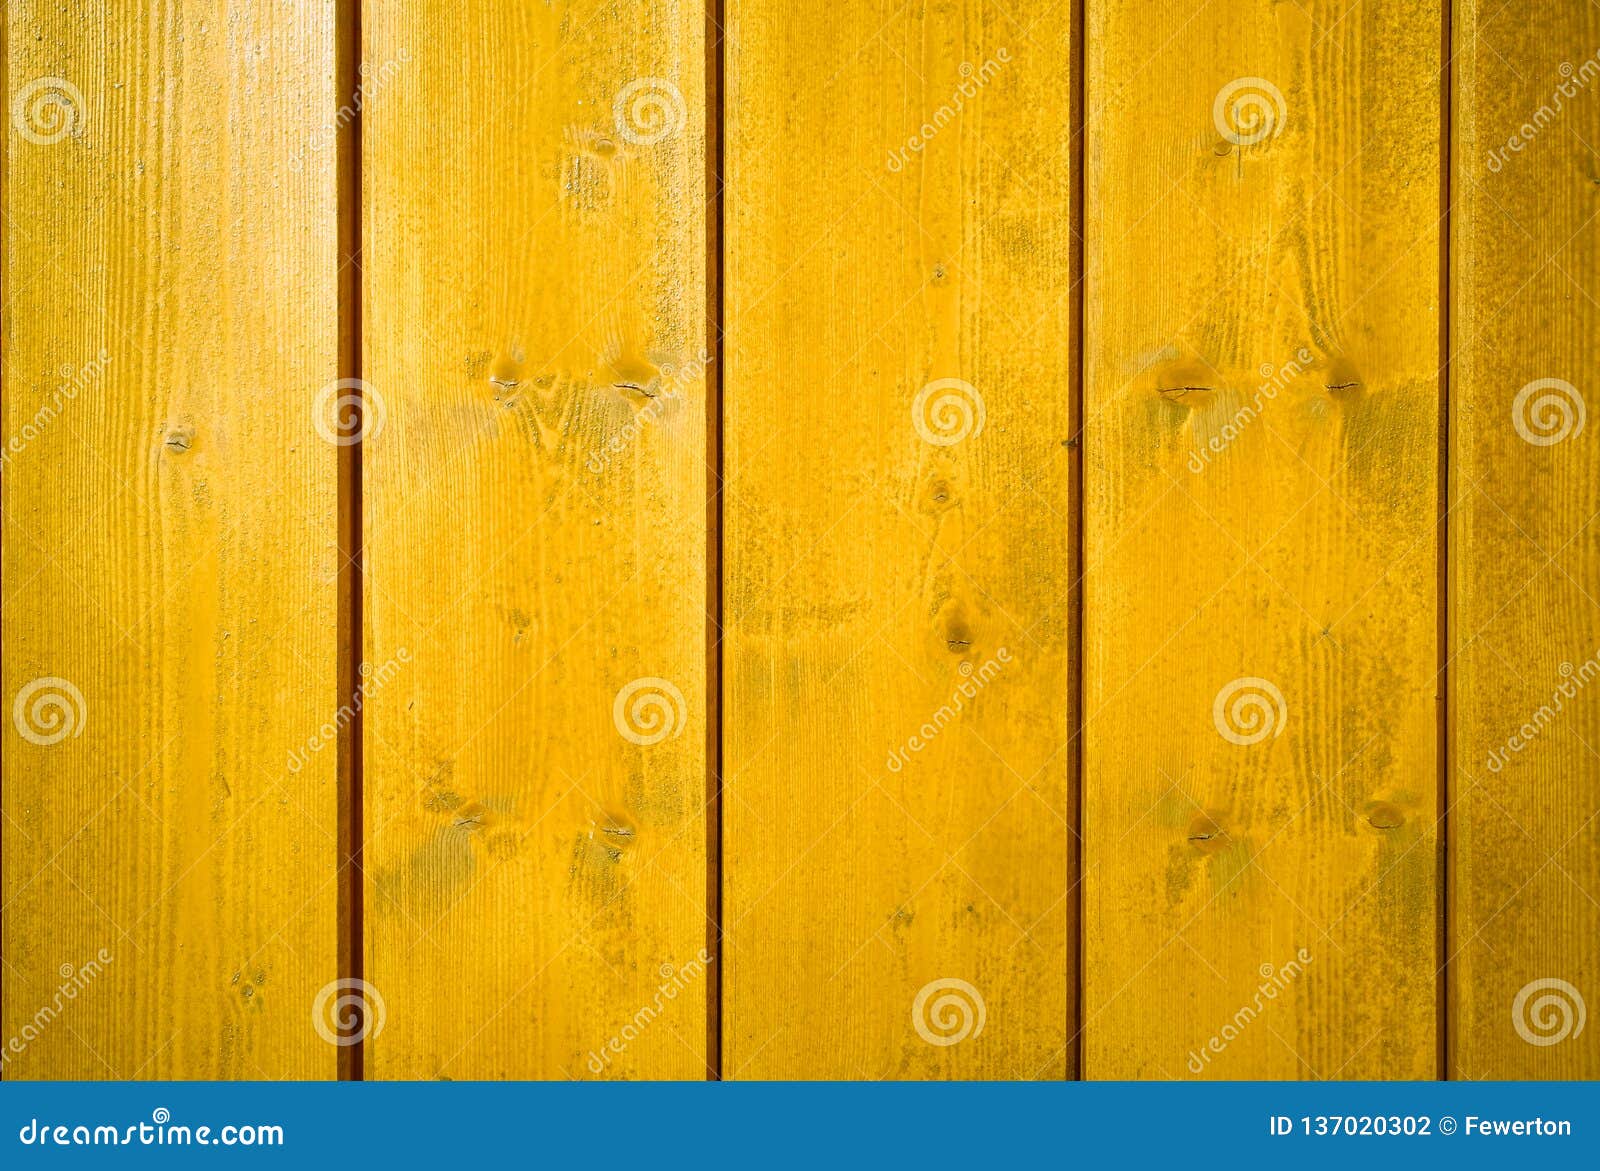 yellow orange painted wooden wall plank perpendicular to the frame as simple saturated intense yellow color wood background